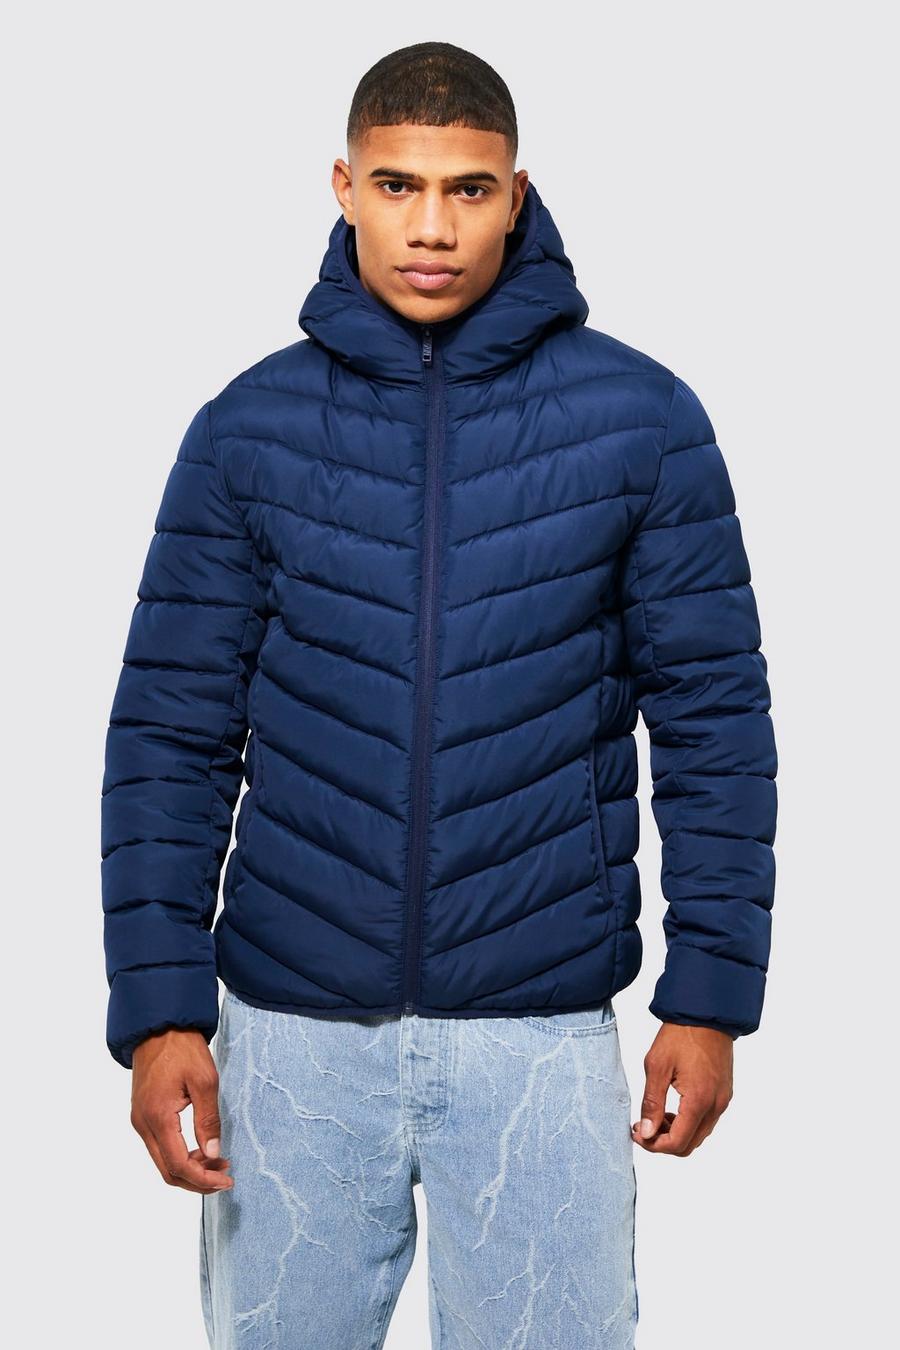 Navy Quilted Zip Through Jacket With Hood